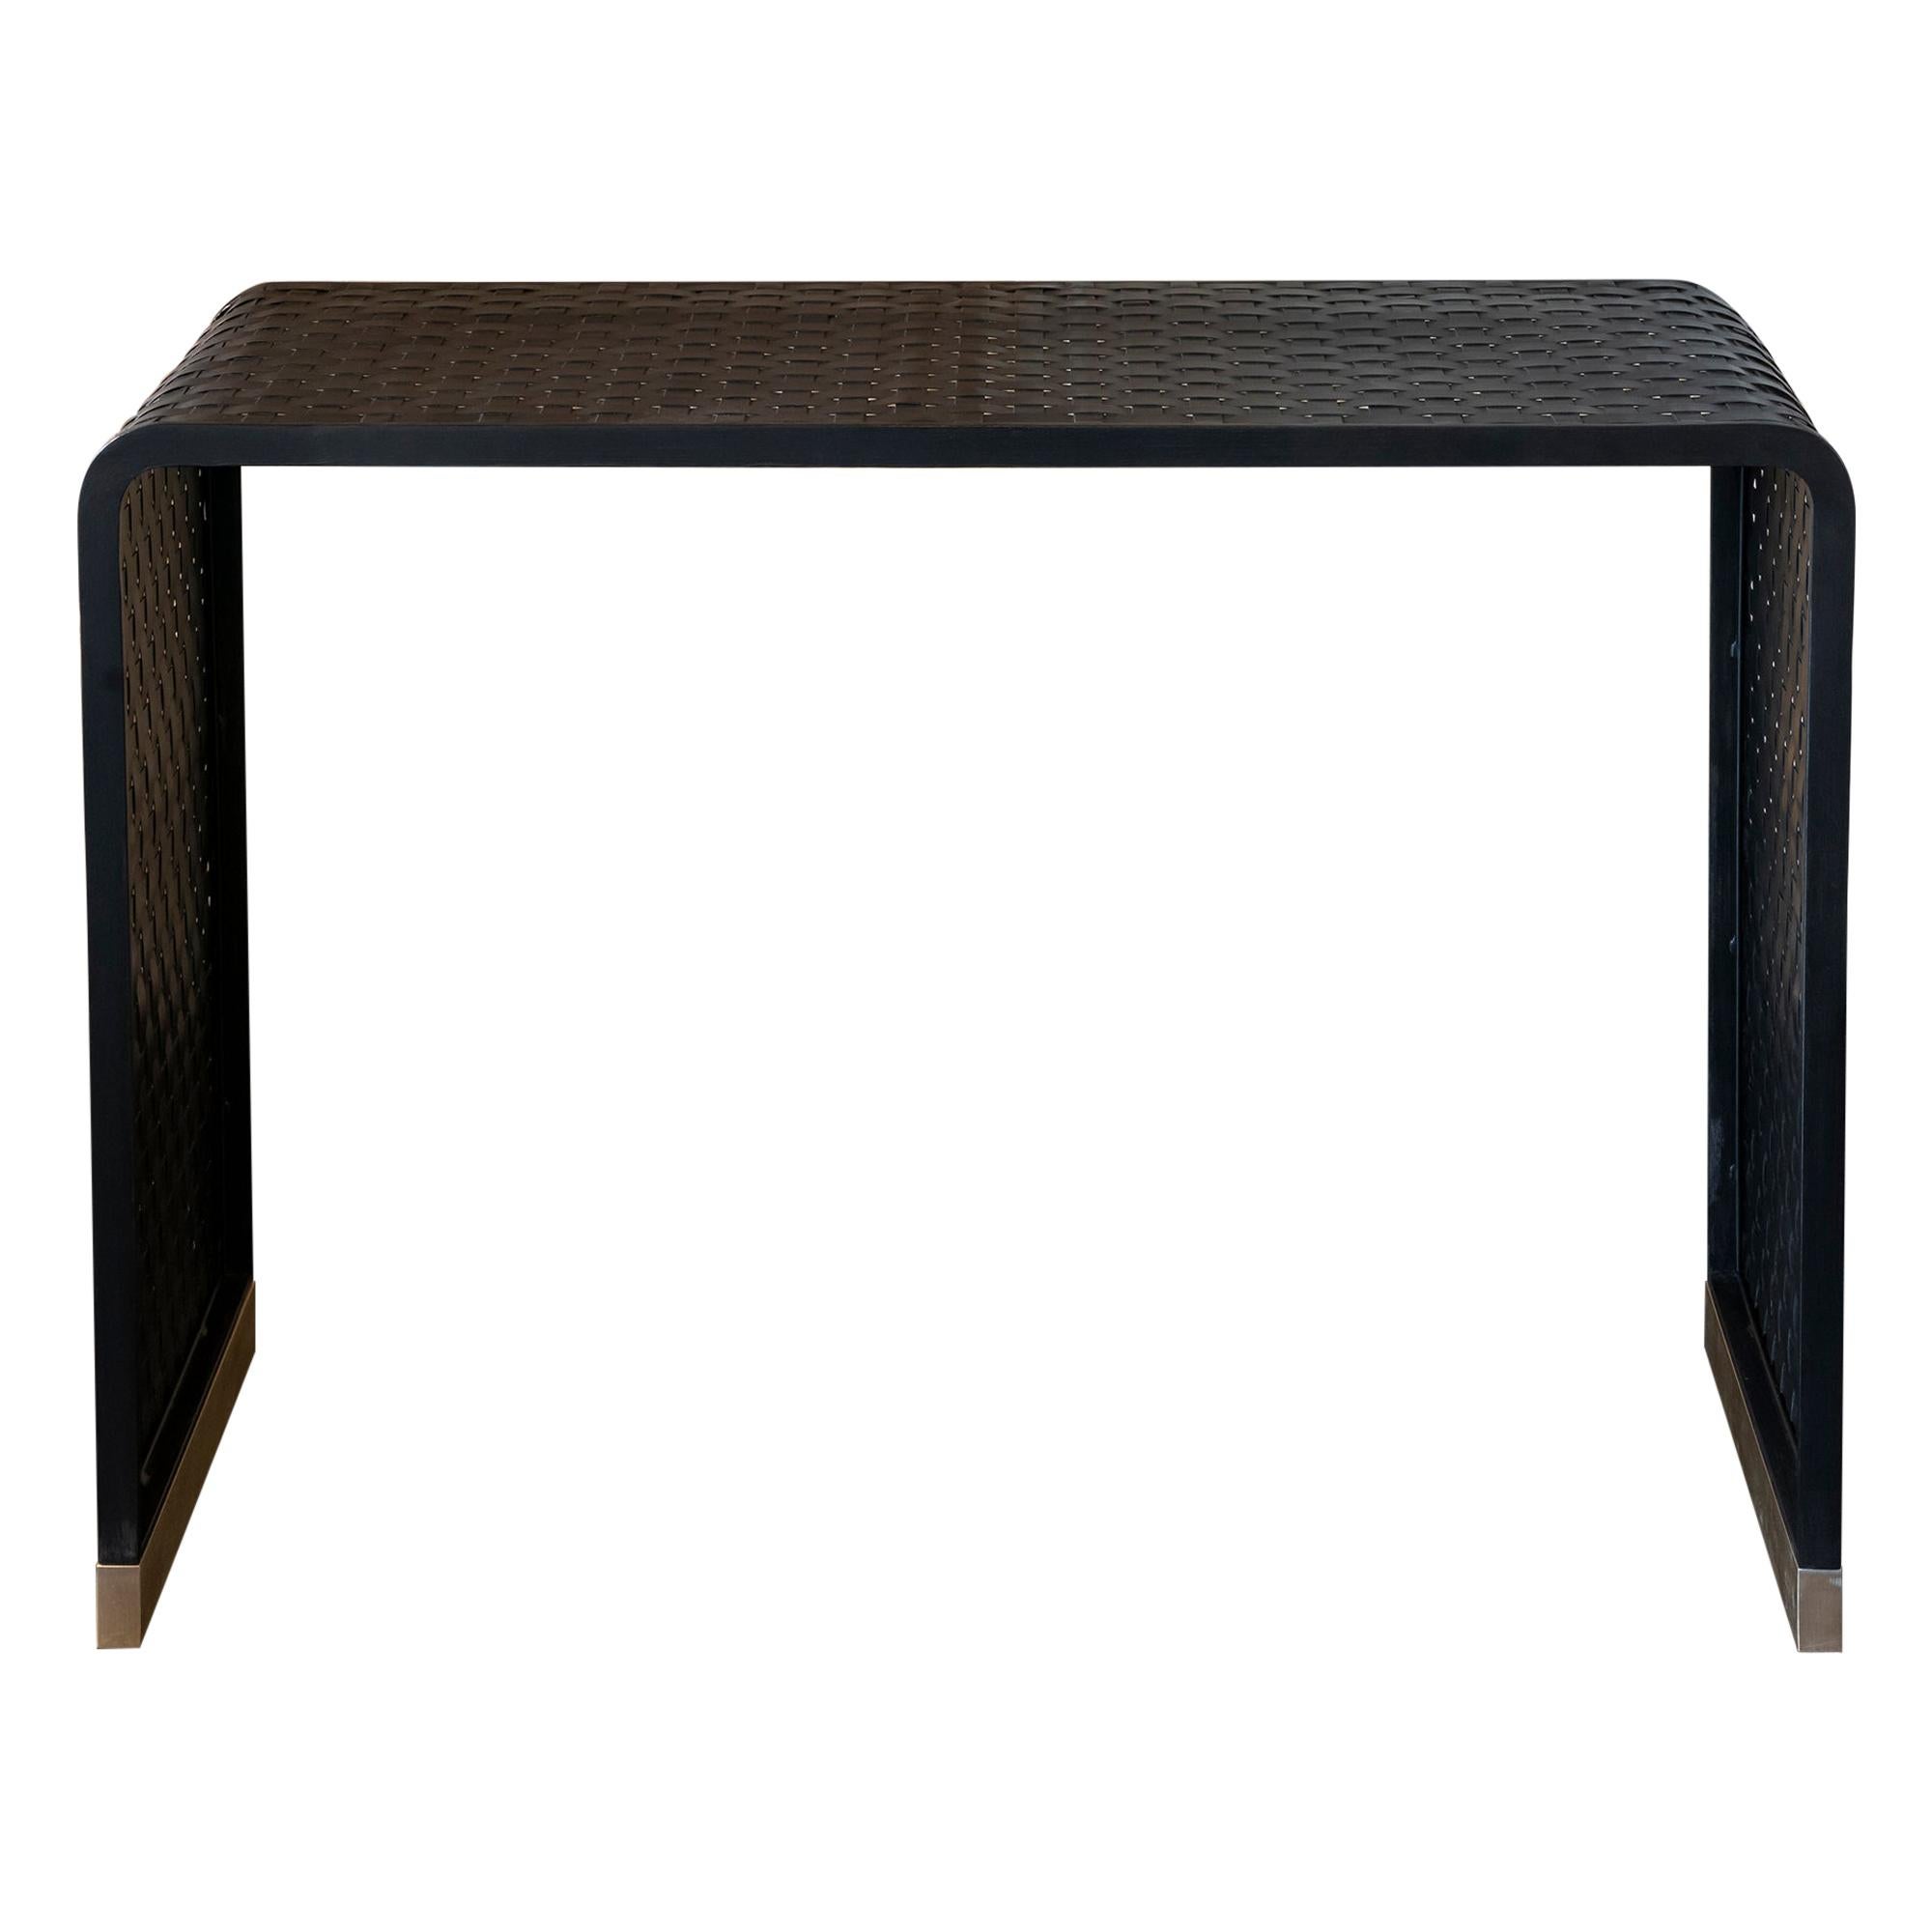 Flair Edition “Intreccio” Console In Black Steel and Natural Brass, Italy, 2022 For Sale